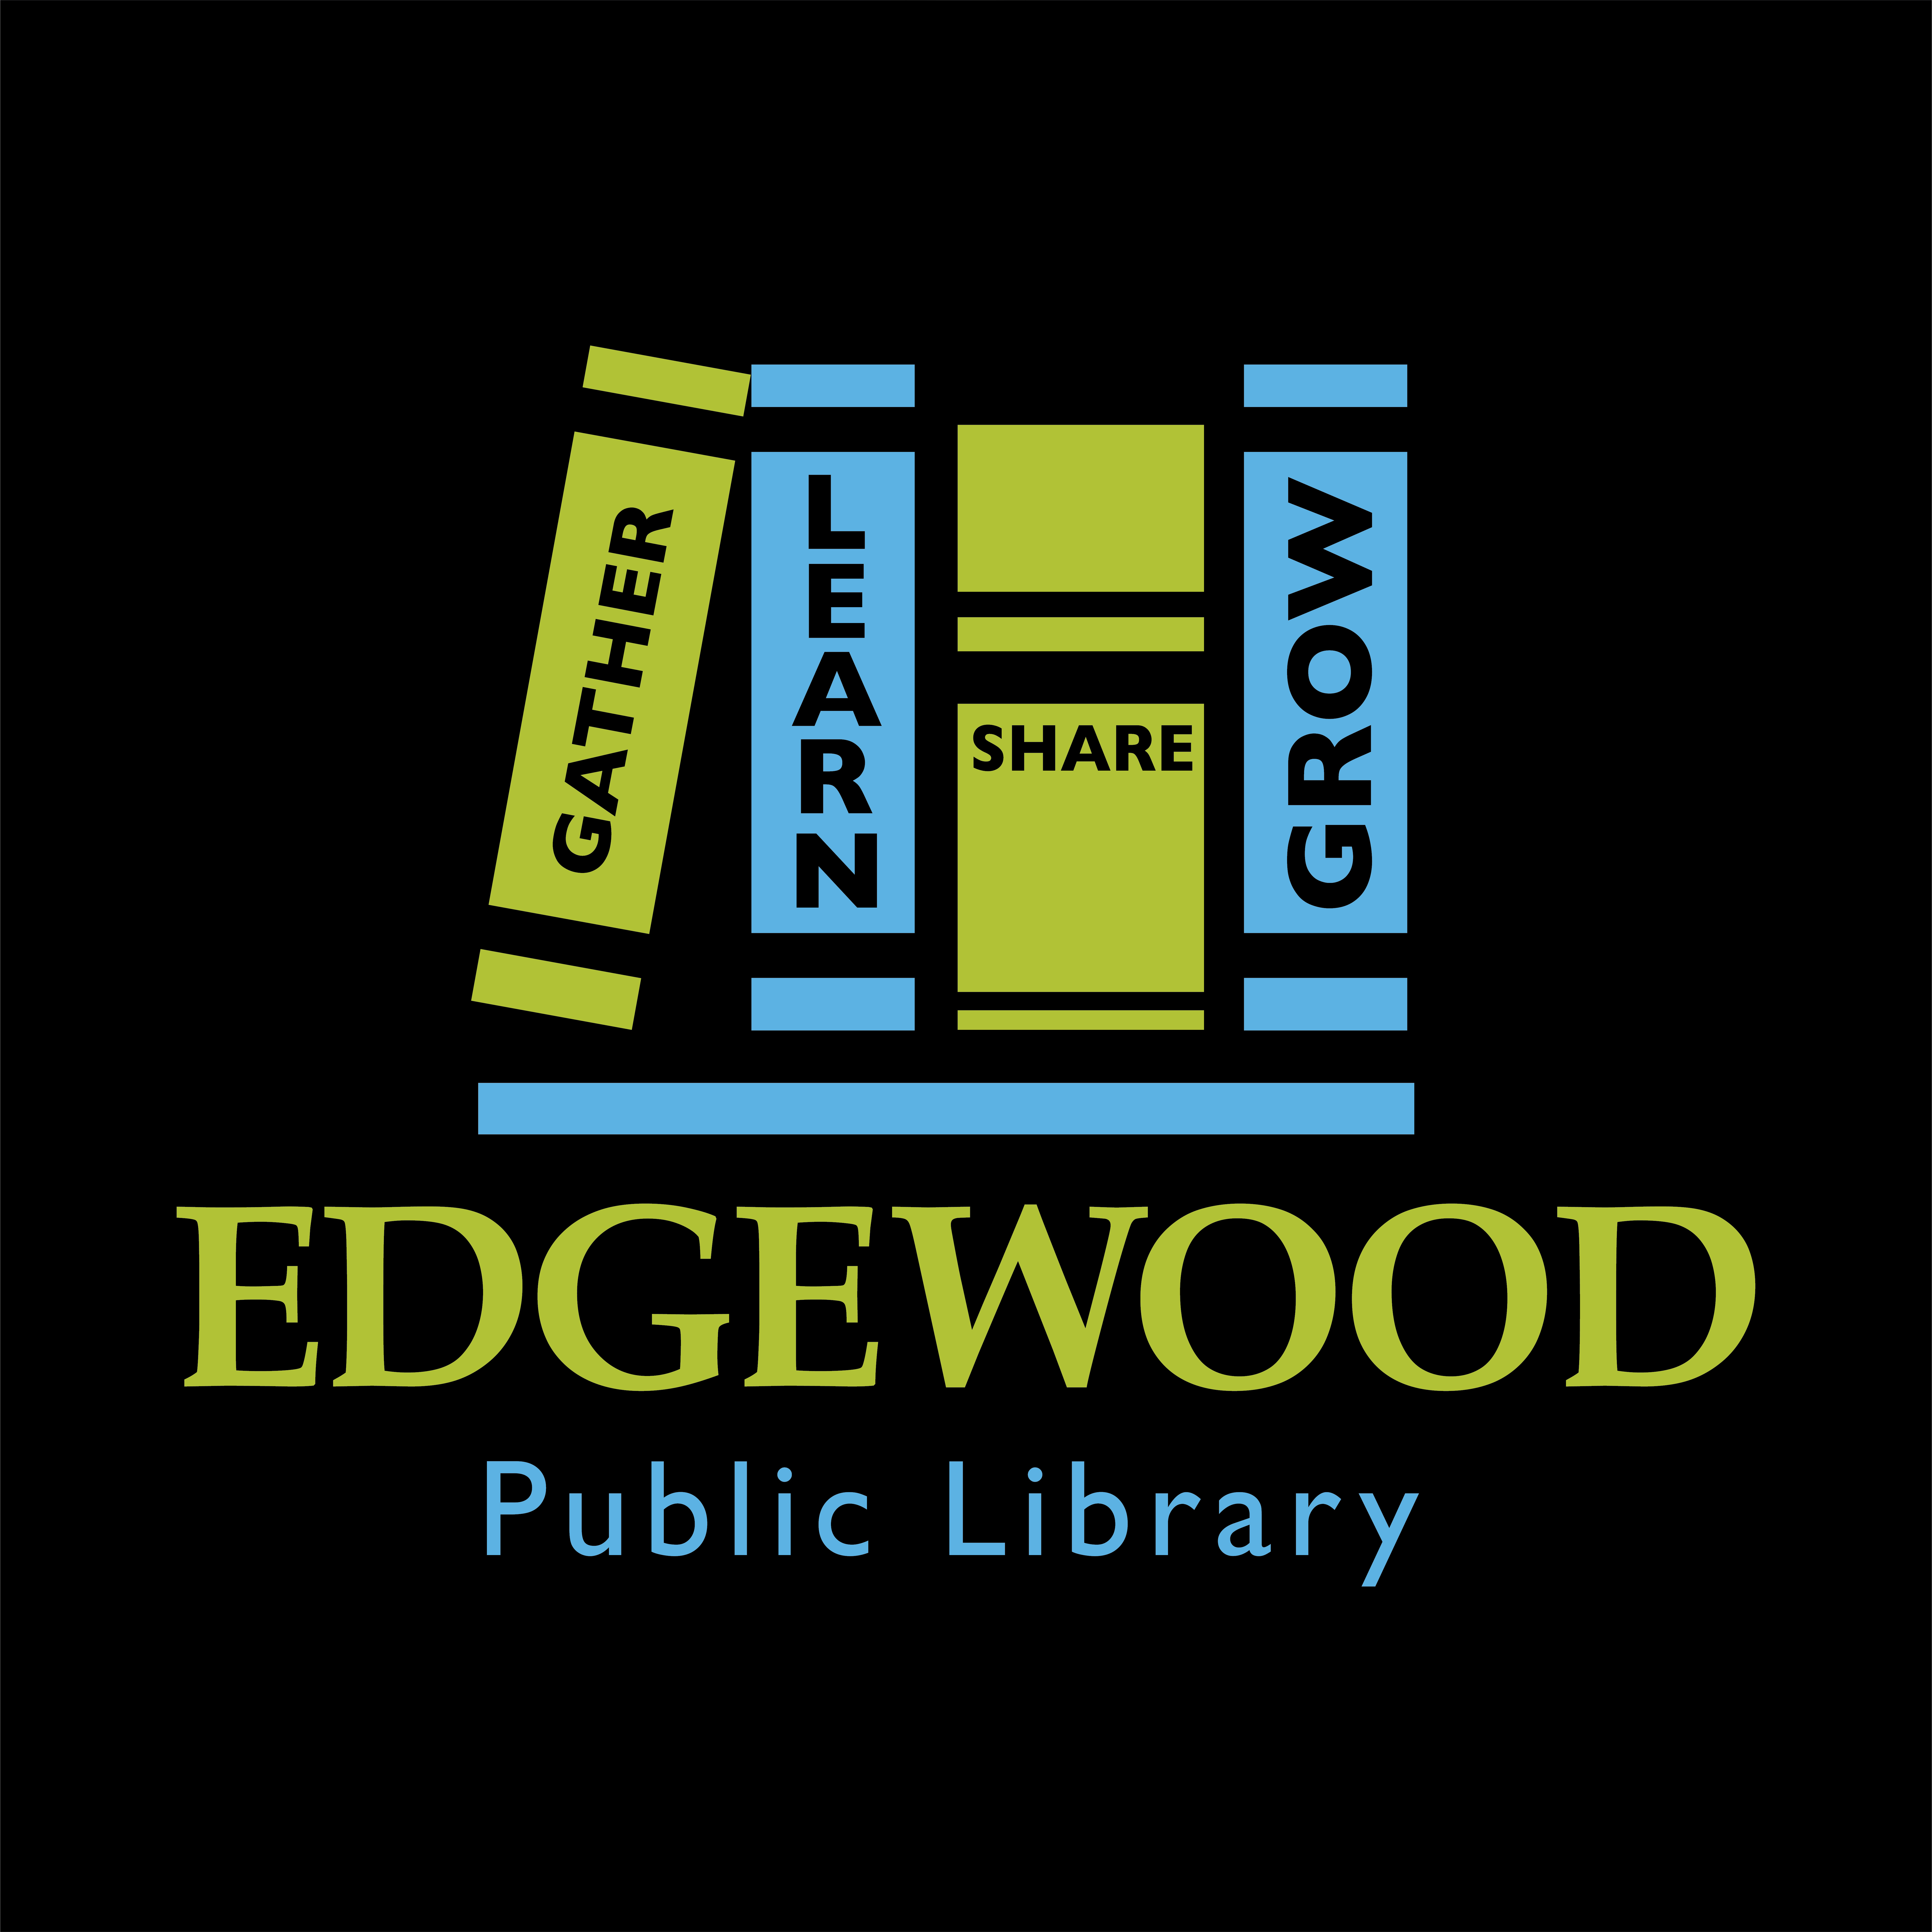 The Edgewood Public Library